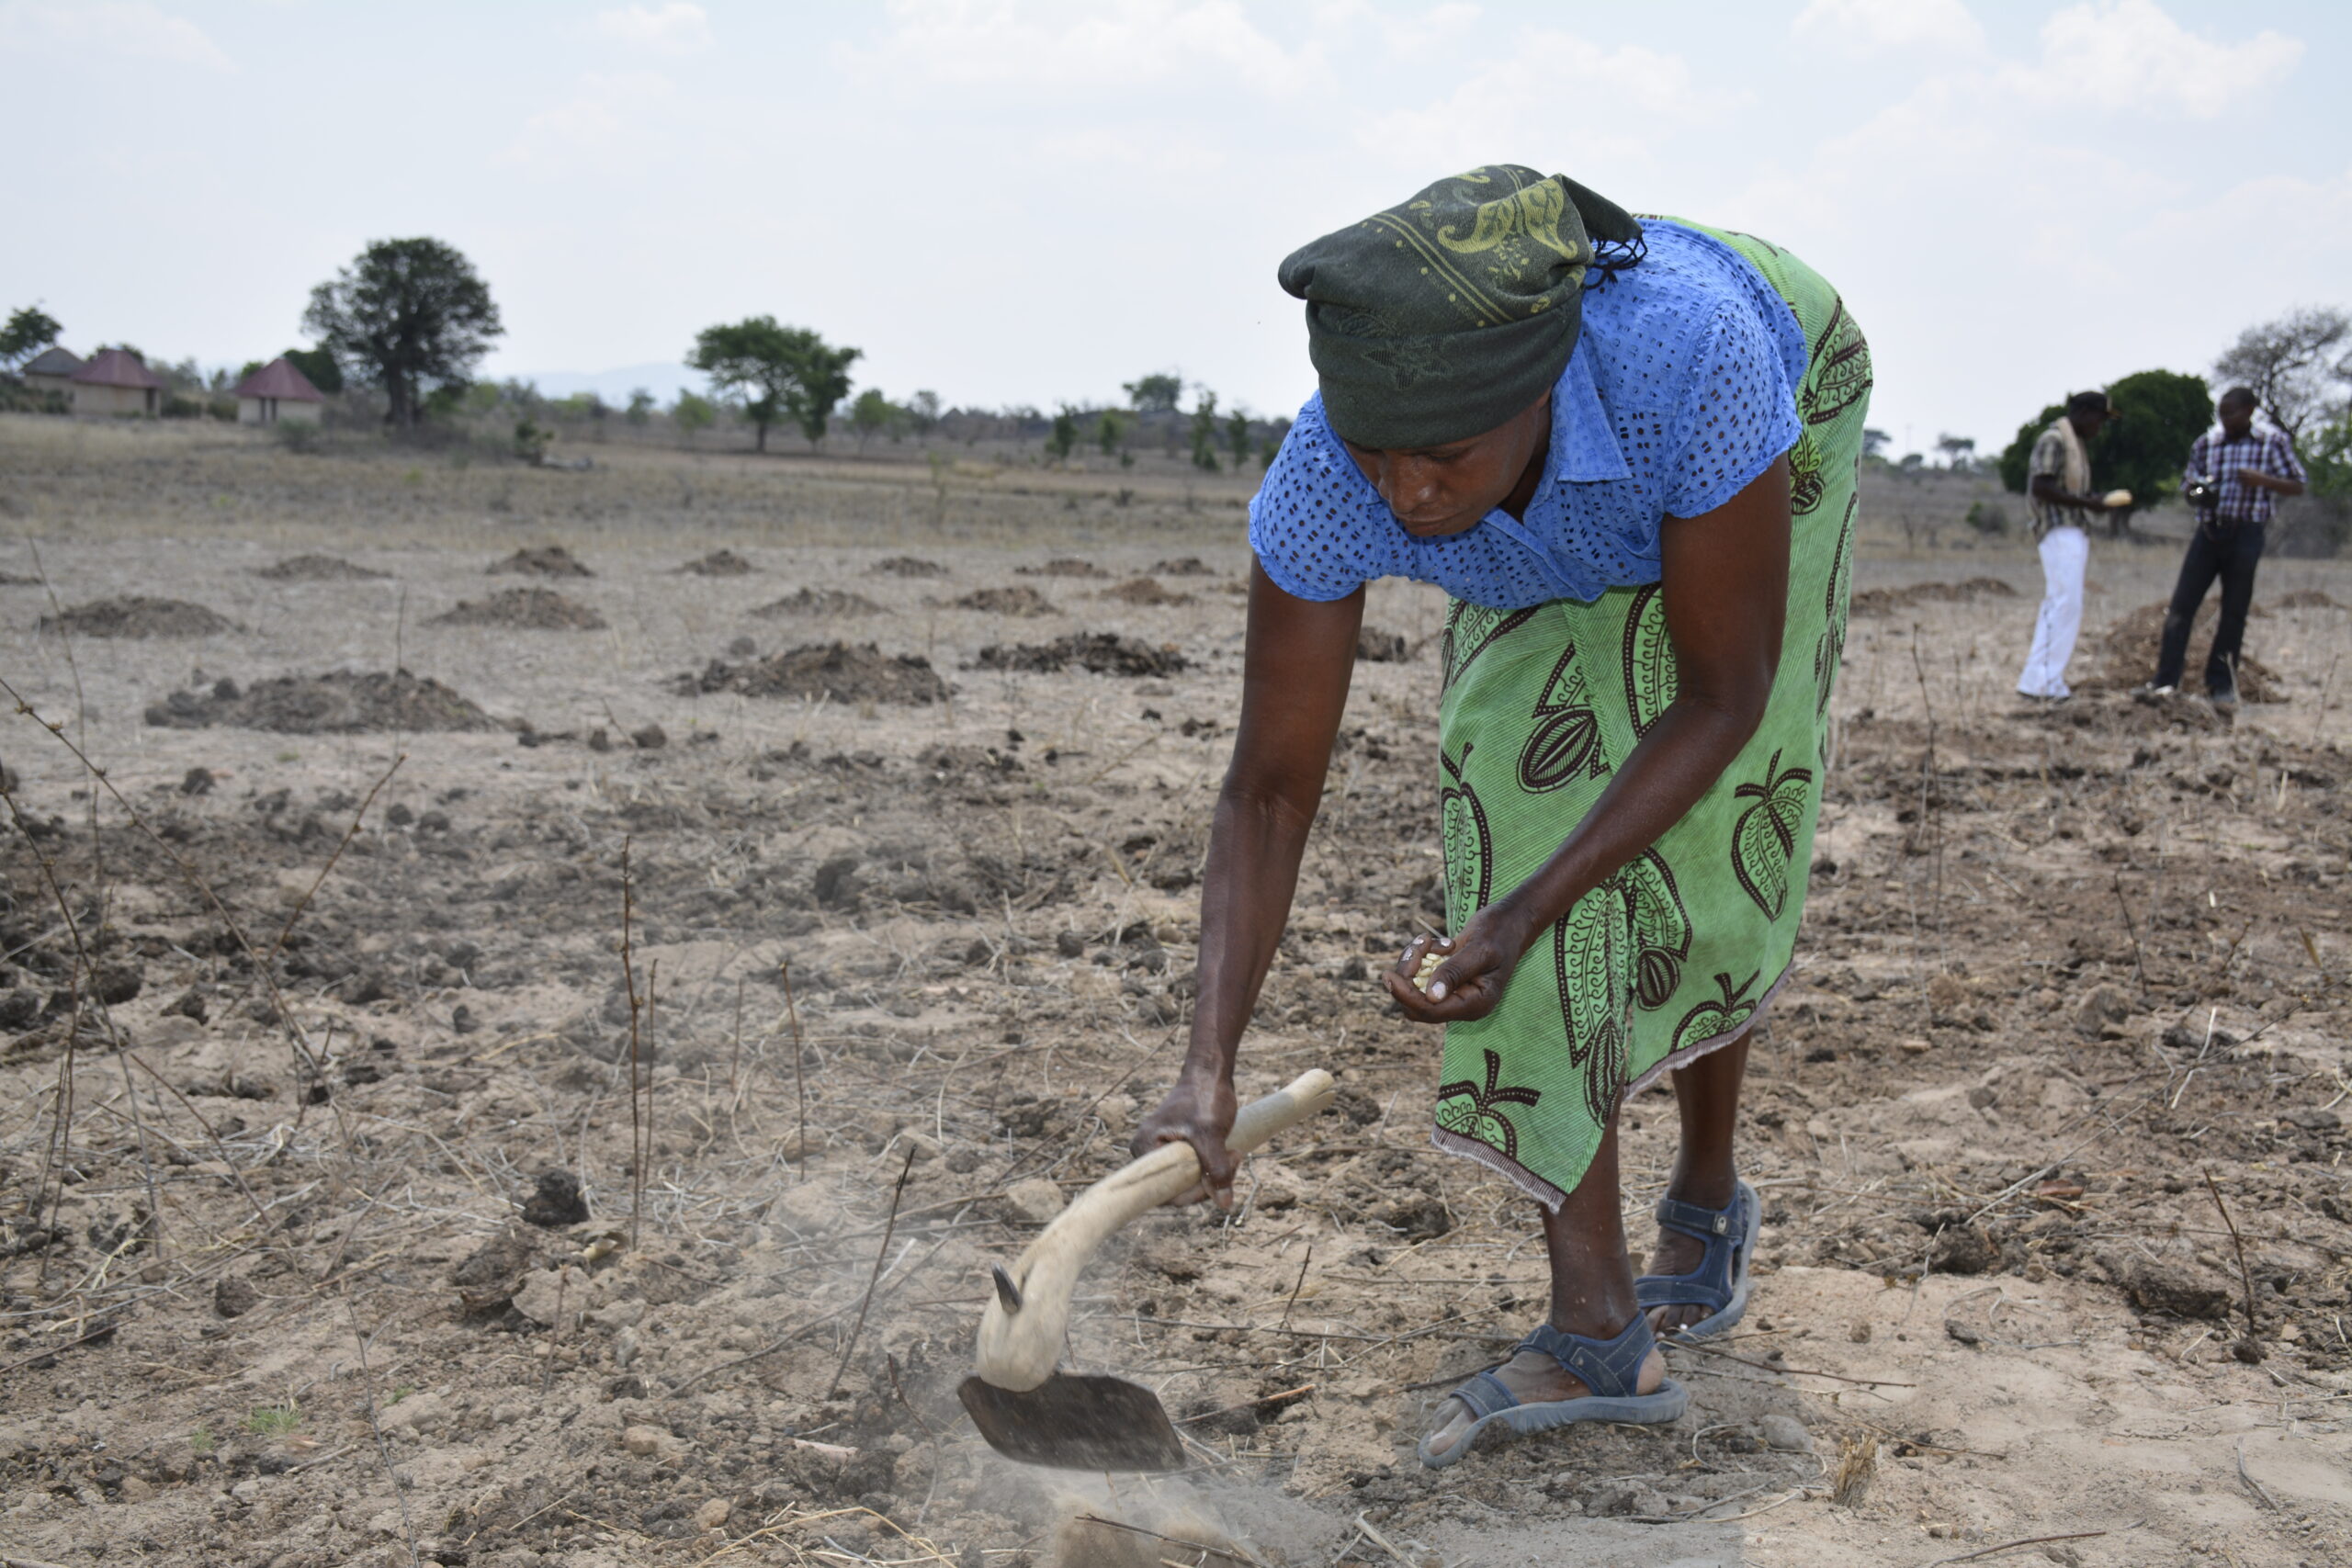 A maize farmer in Zimbabwe ploughs parched, brown earth